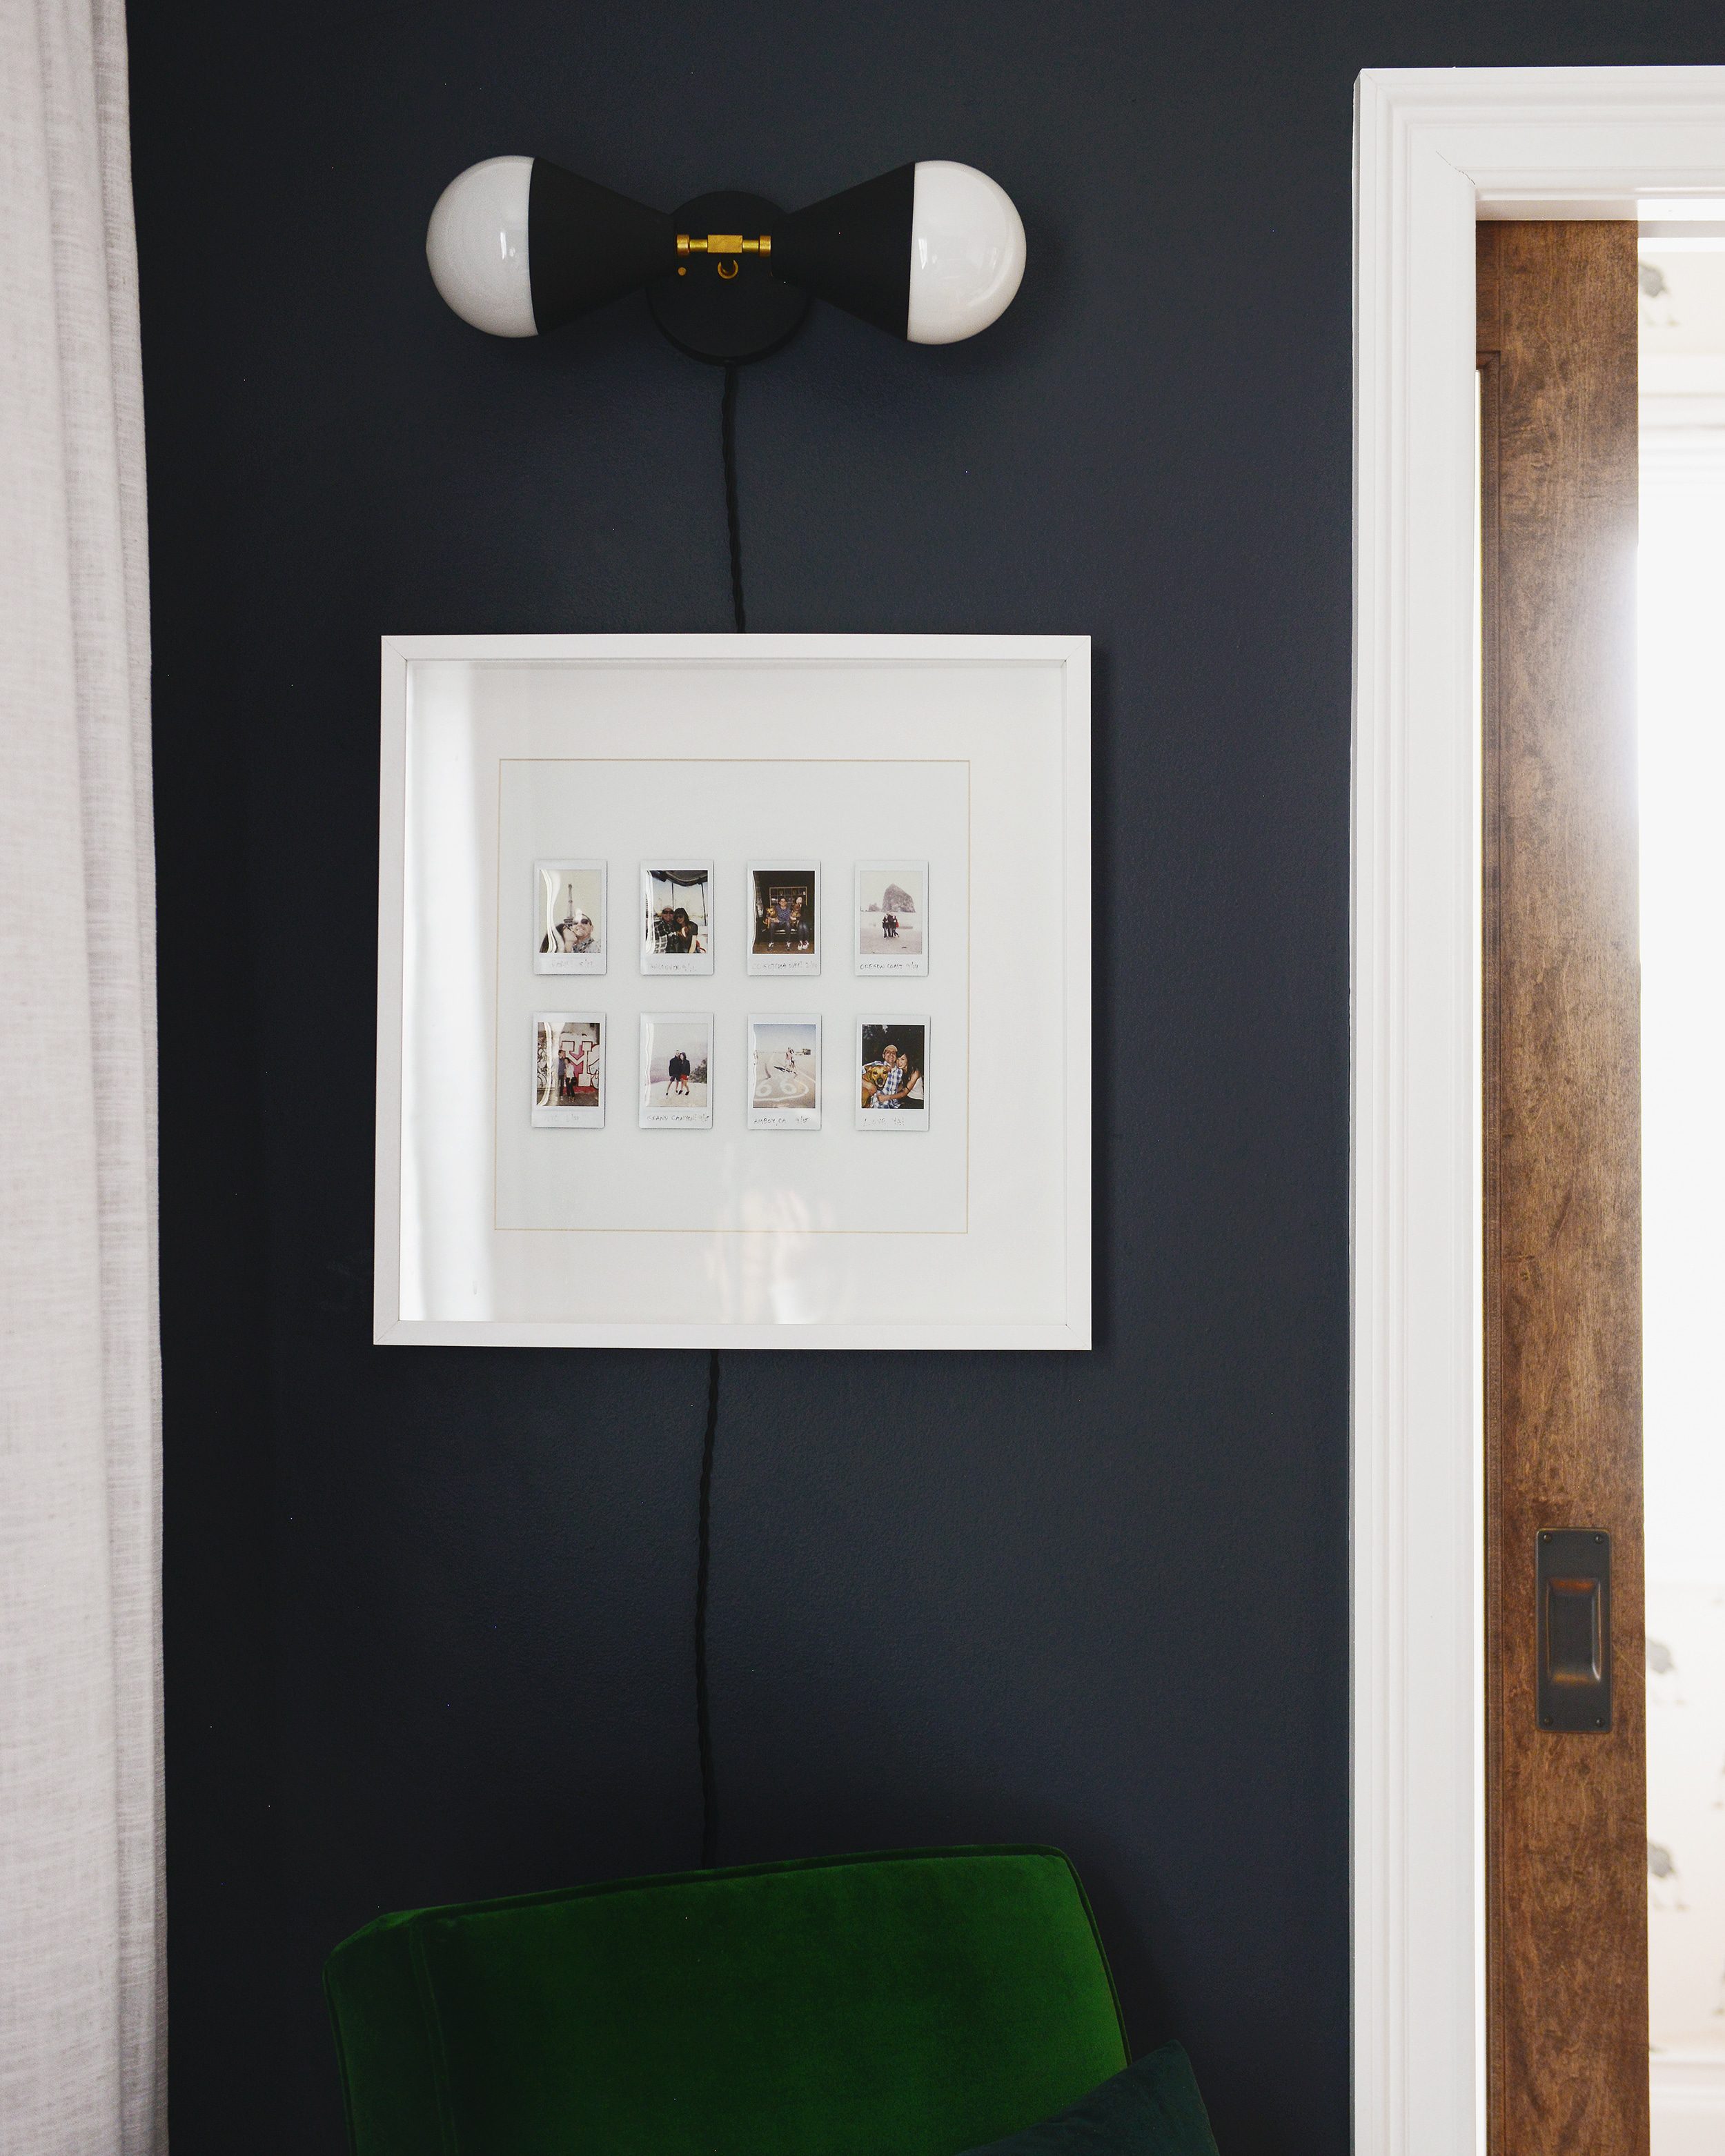 Instant photo frame display against a black wall in a bedroom | via Yellow Brick Home